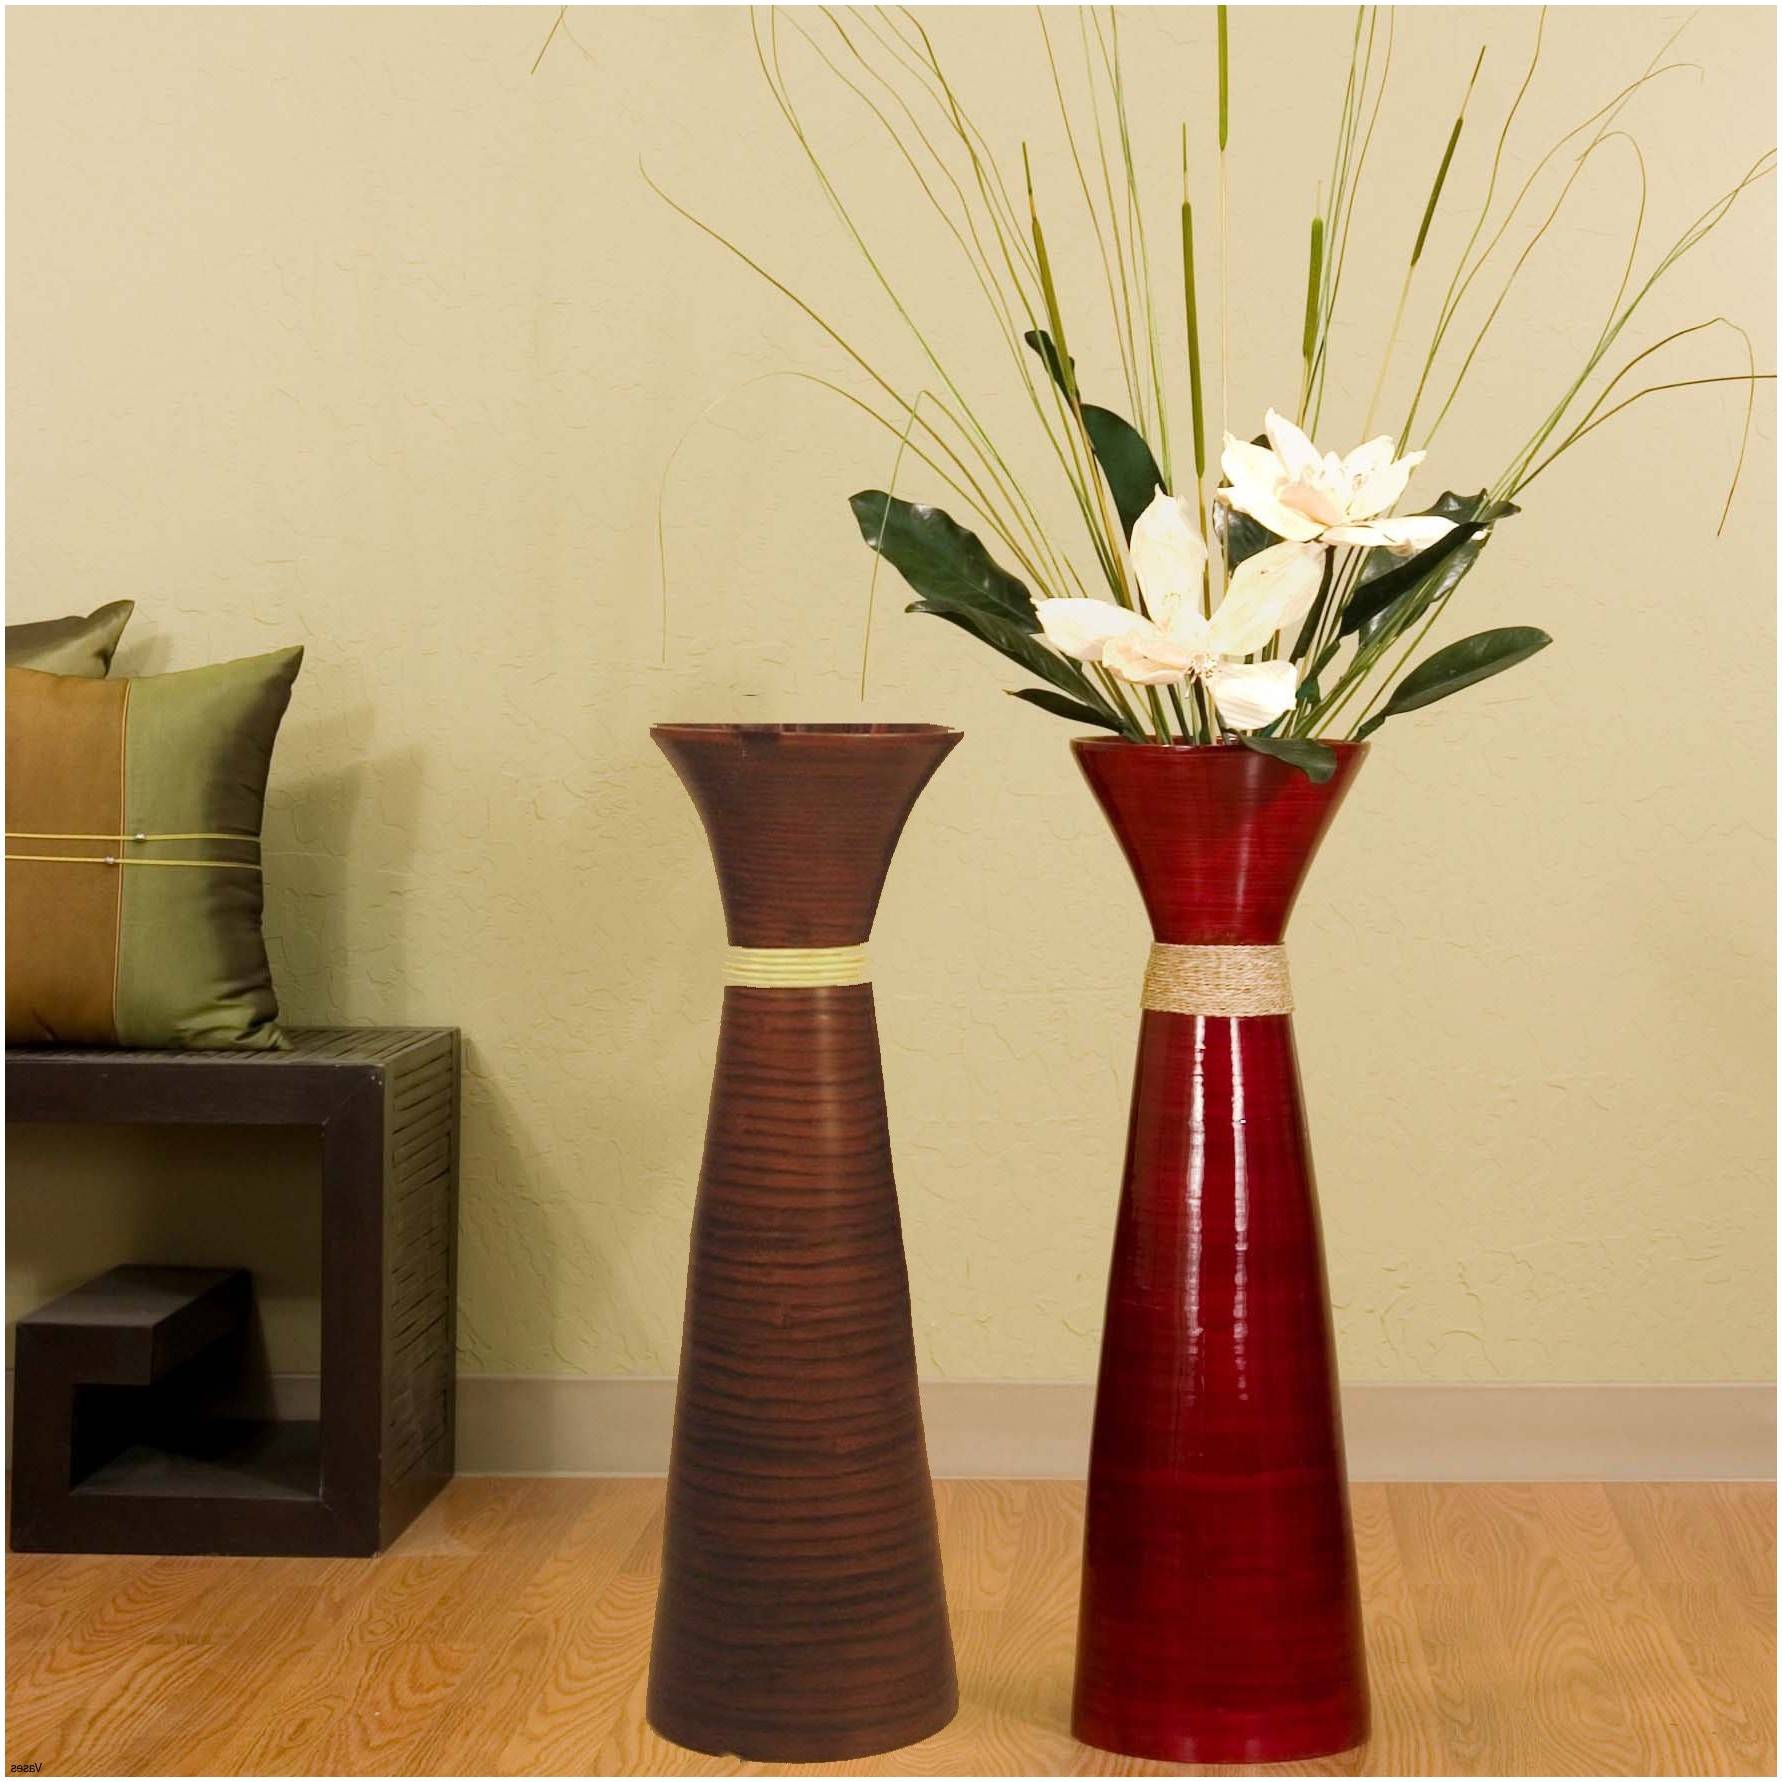 11 Famous Large Bamboo Floor Vases 2024 free download large bamboo floor vases of 21 beau decorative vases anciendemutu org intended for floor vase colorsh vases red decorative image colorsi 0d